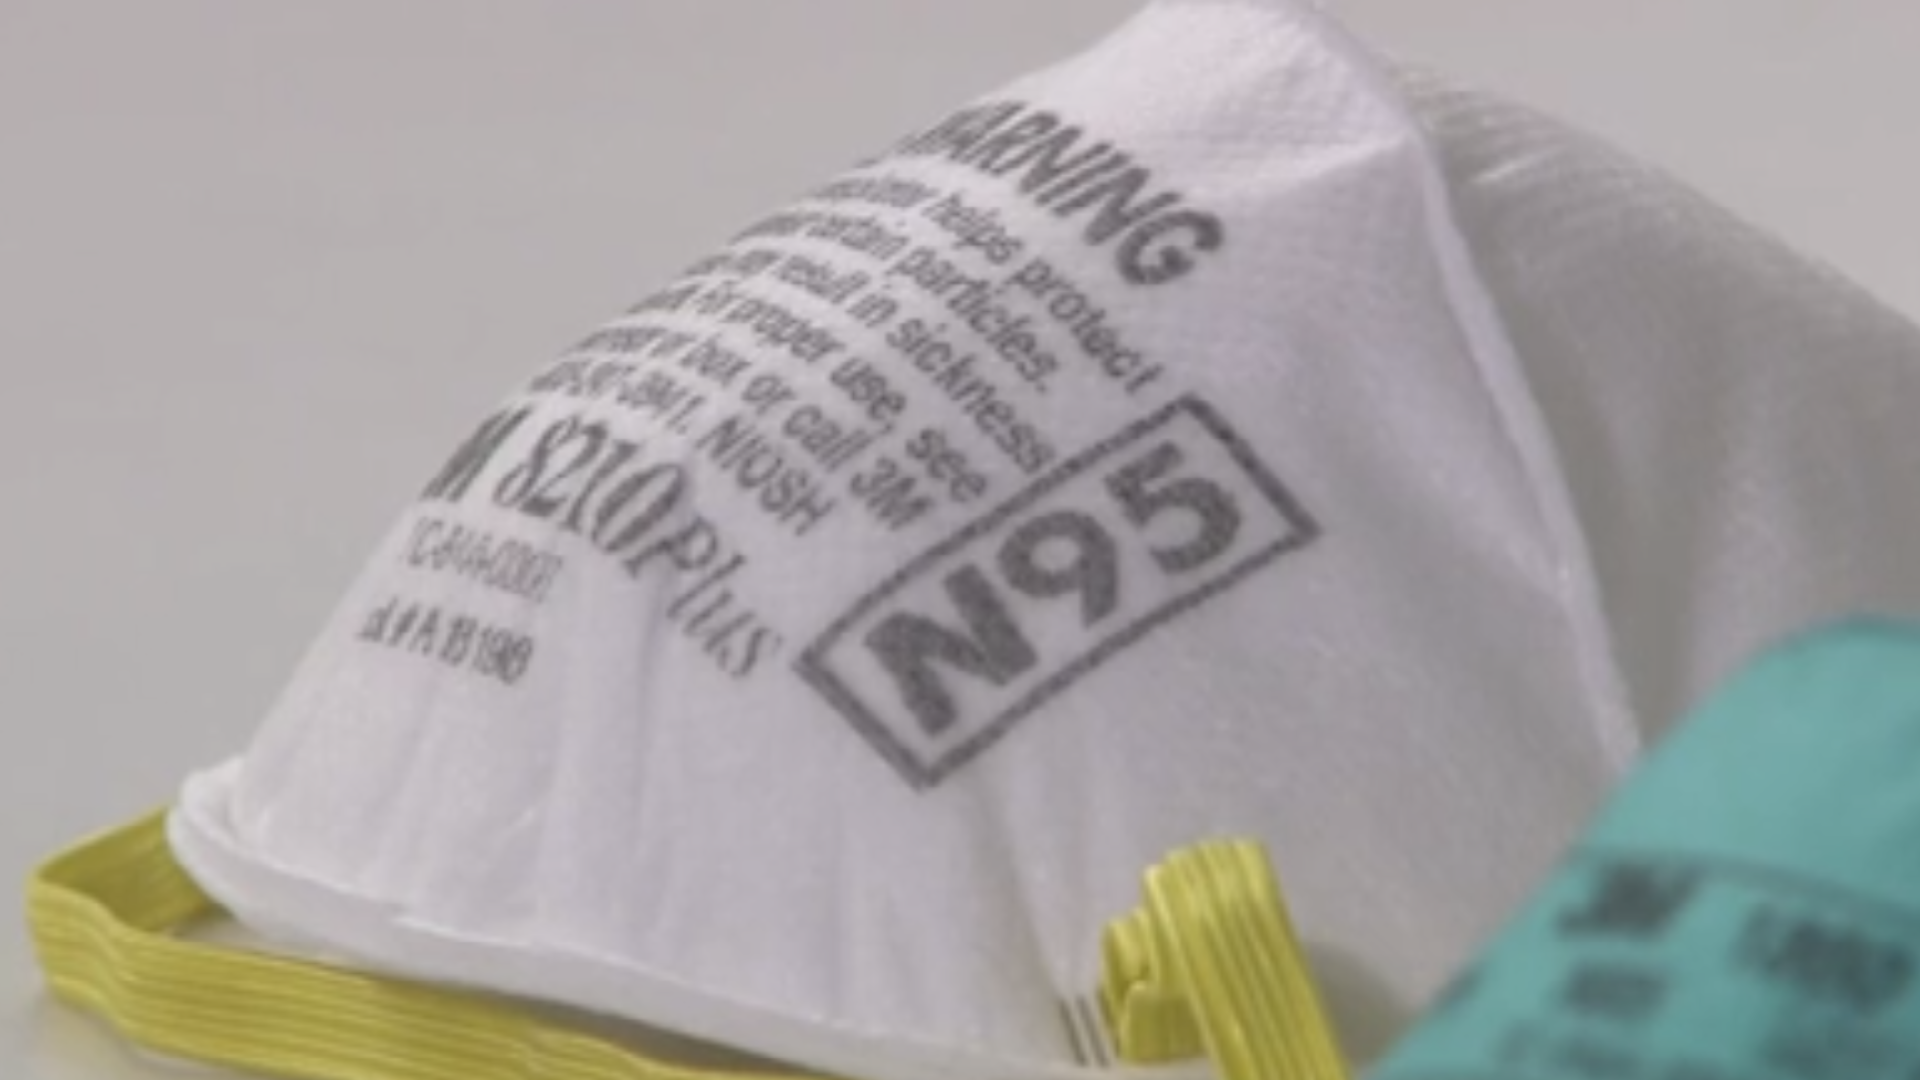 The shortage is so bad, hospital workers are preserving the N95 masks and not using them as often as they should be, one doctor told WCNC Charlotte.